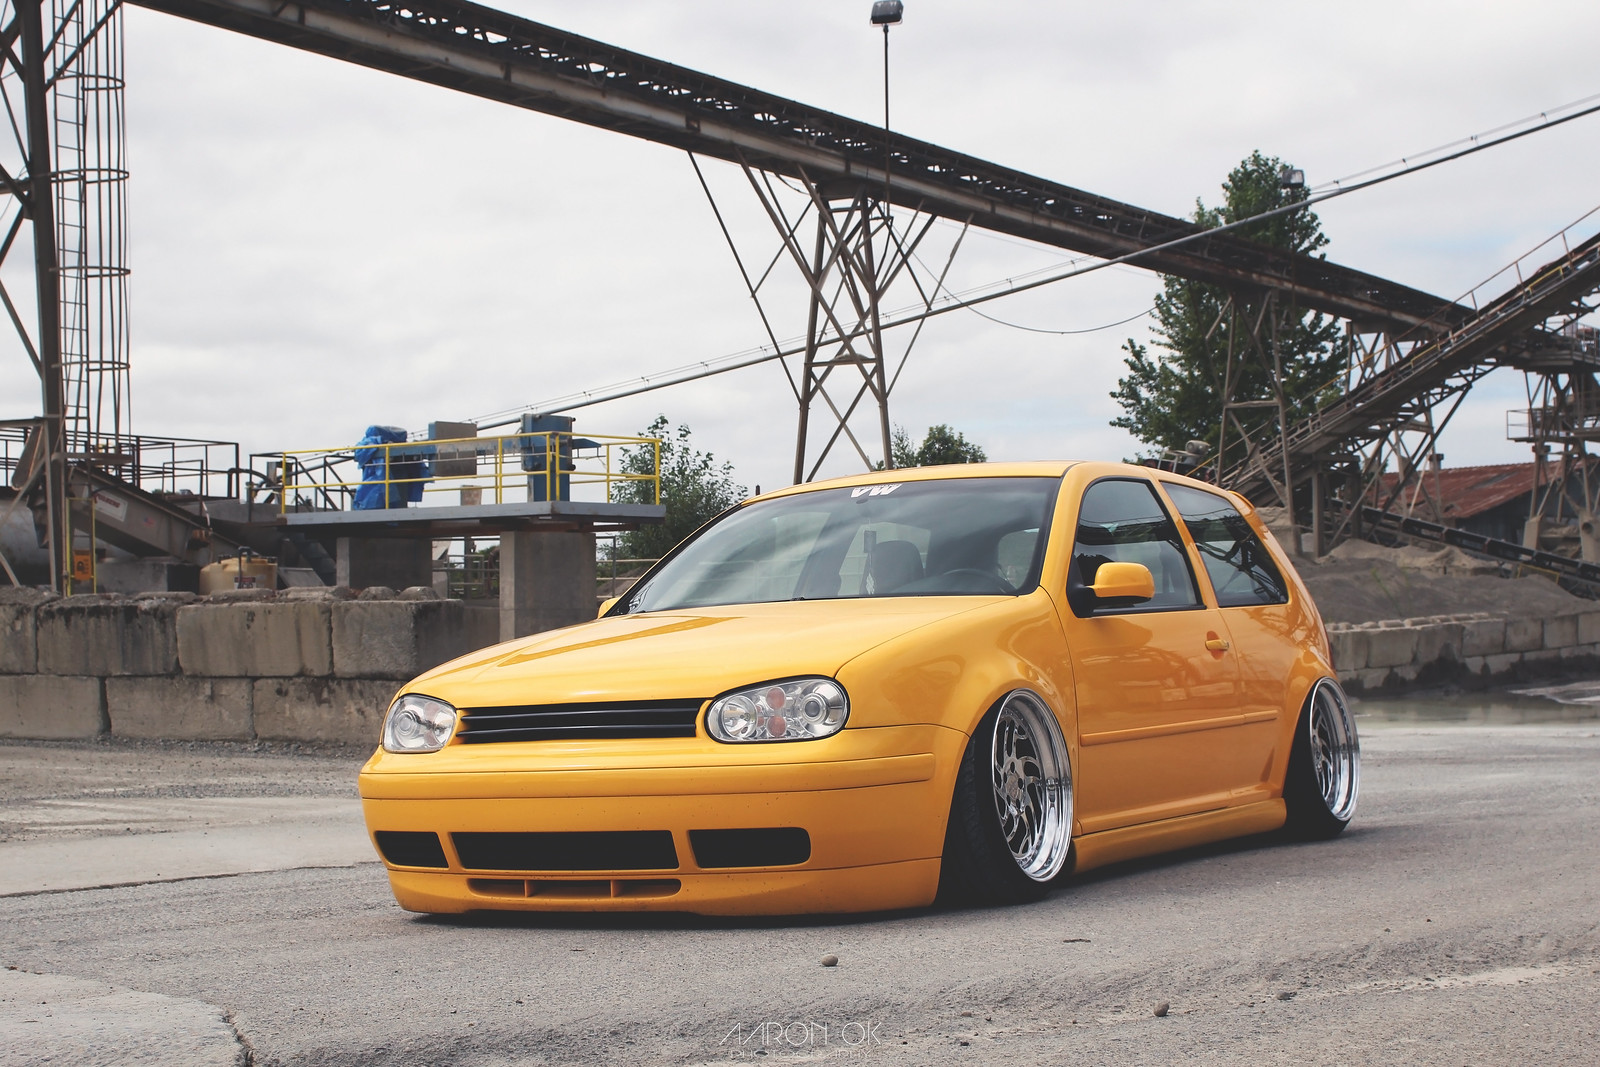 The Official MK4 Stance Thread